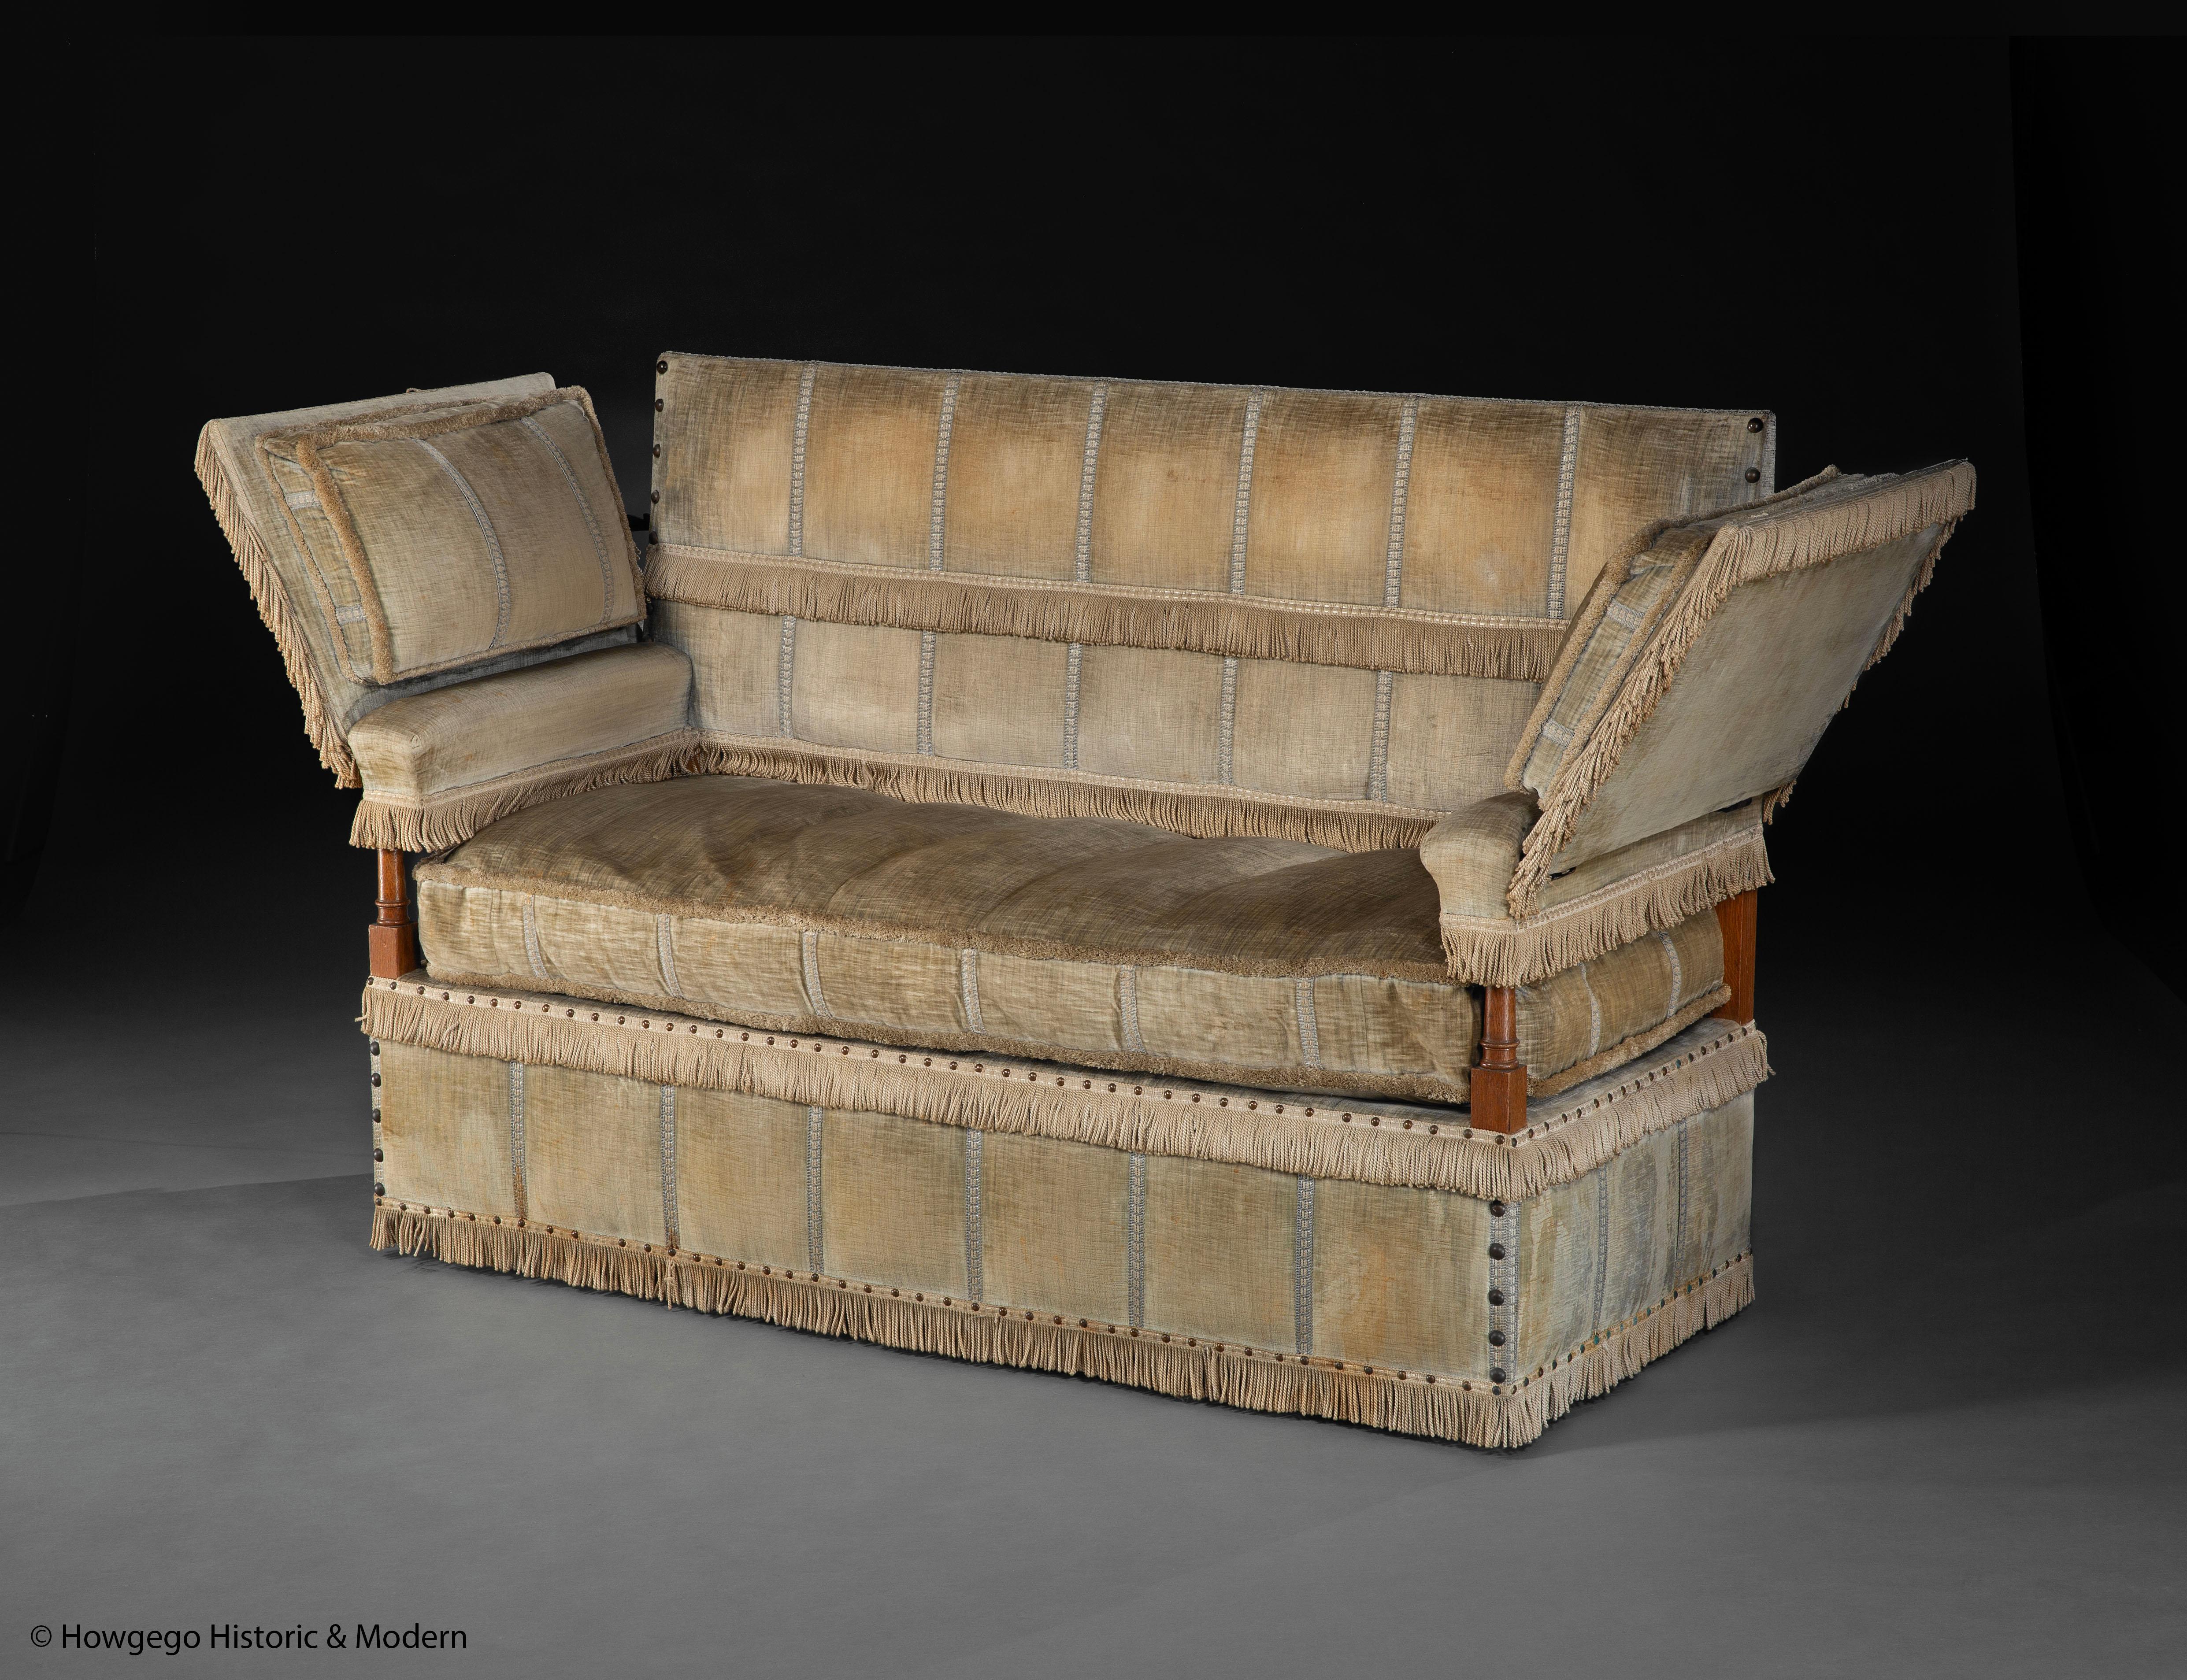 - This is an early 20th century interpretation of the infamous, sumptuously, upholstered, 17th century, couch with hinged arm rests, found at Knole Park, Sevenoaks, Kent, the ancestral seat of the Sackvilles made by the most eminent upholsterer of